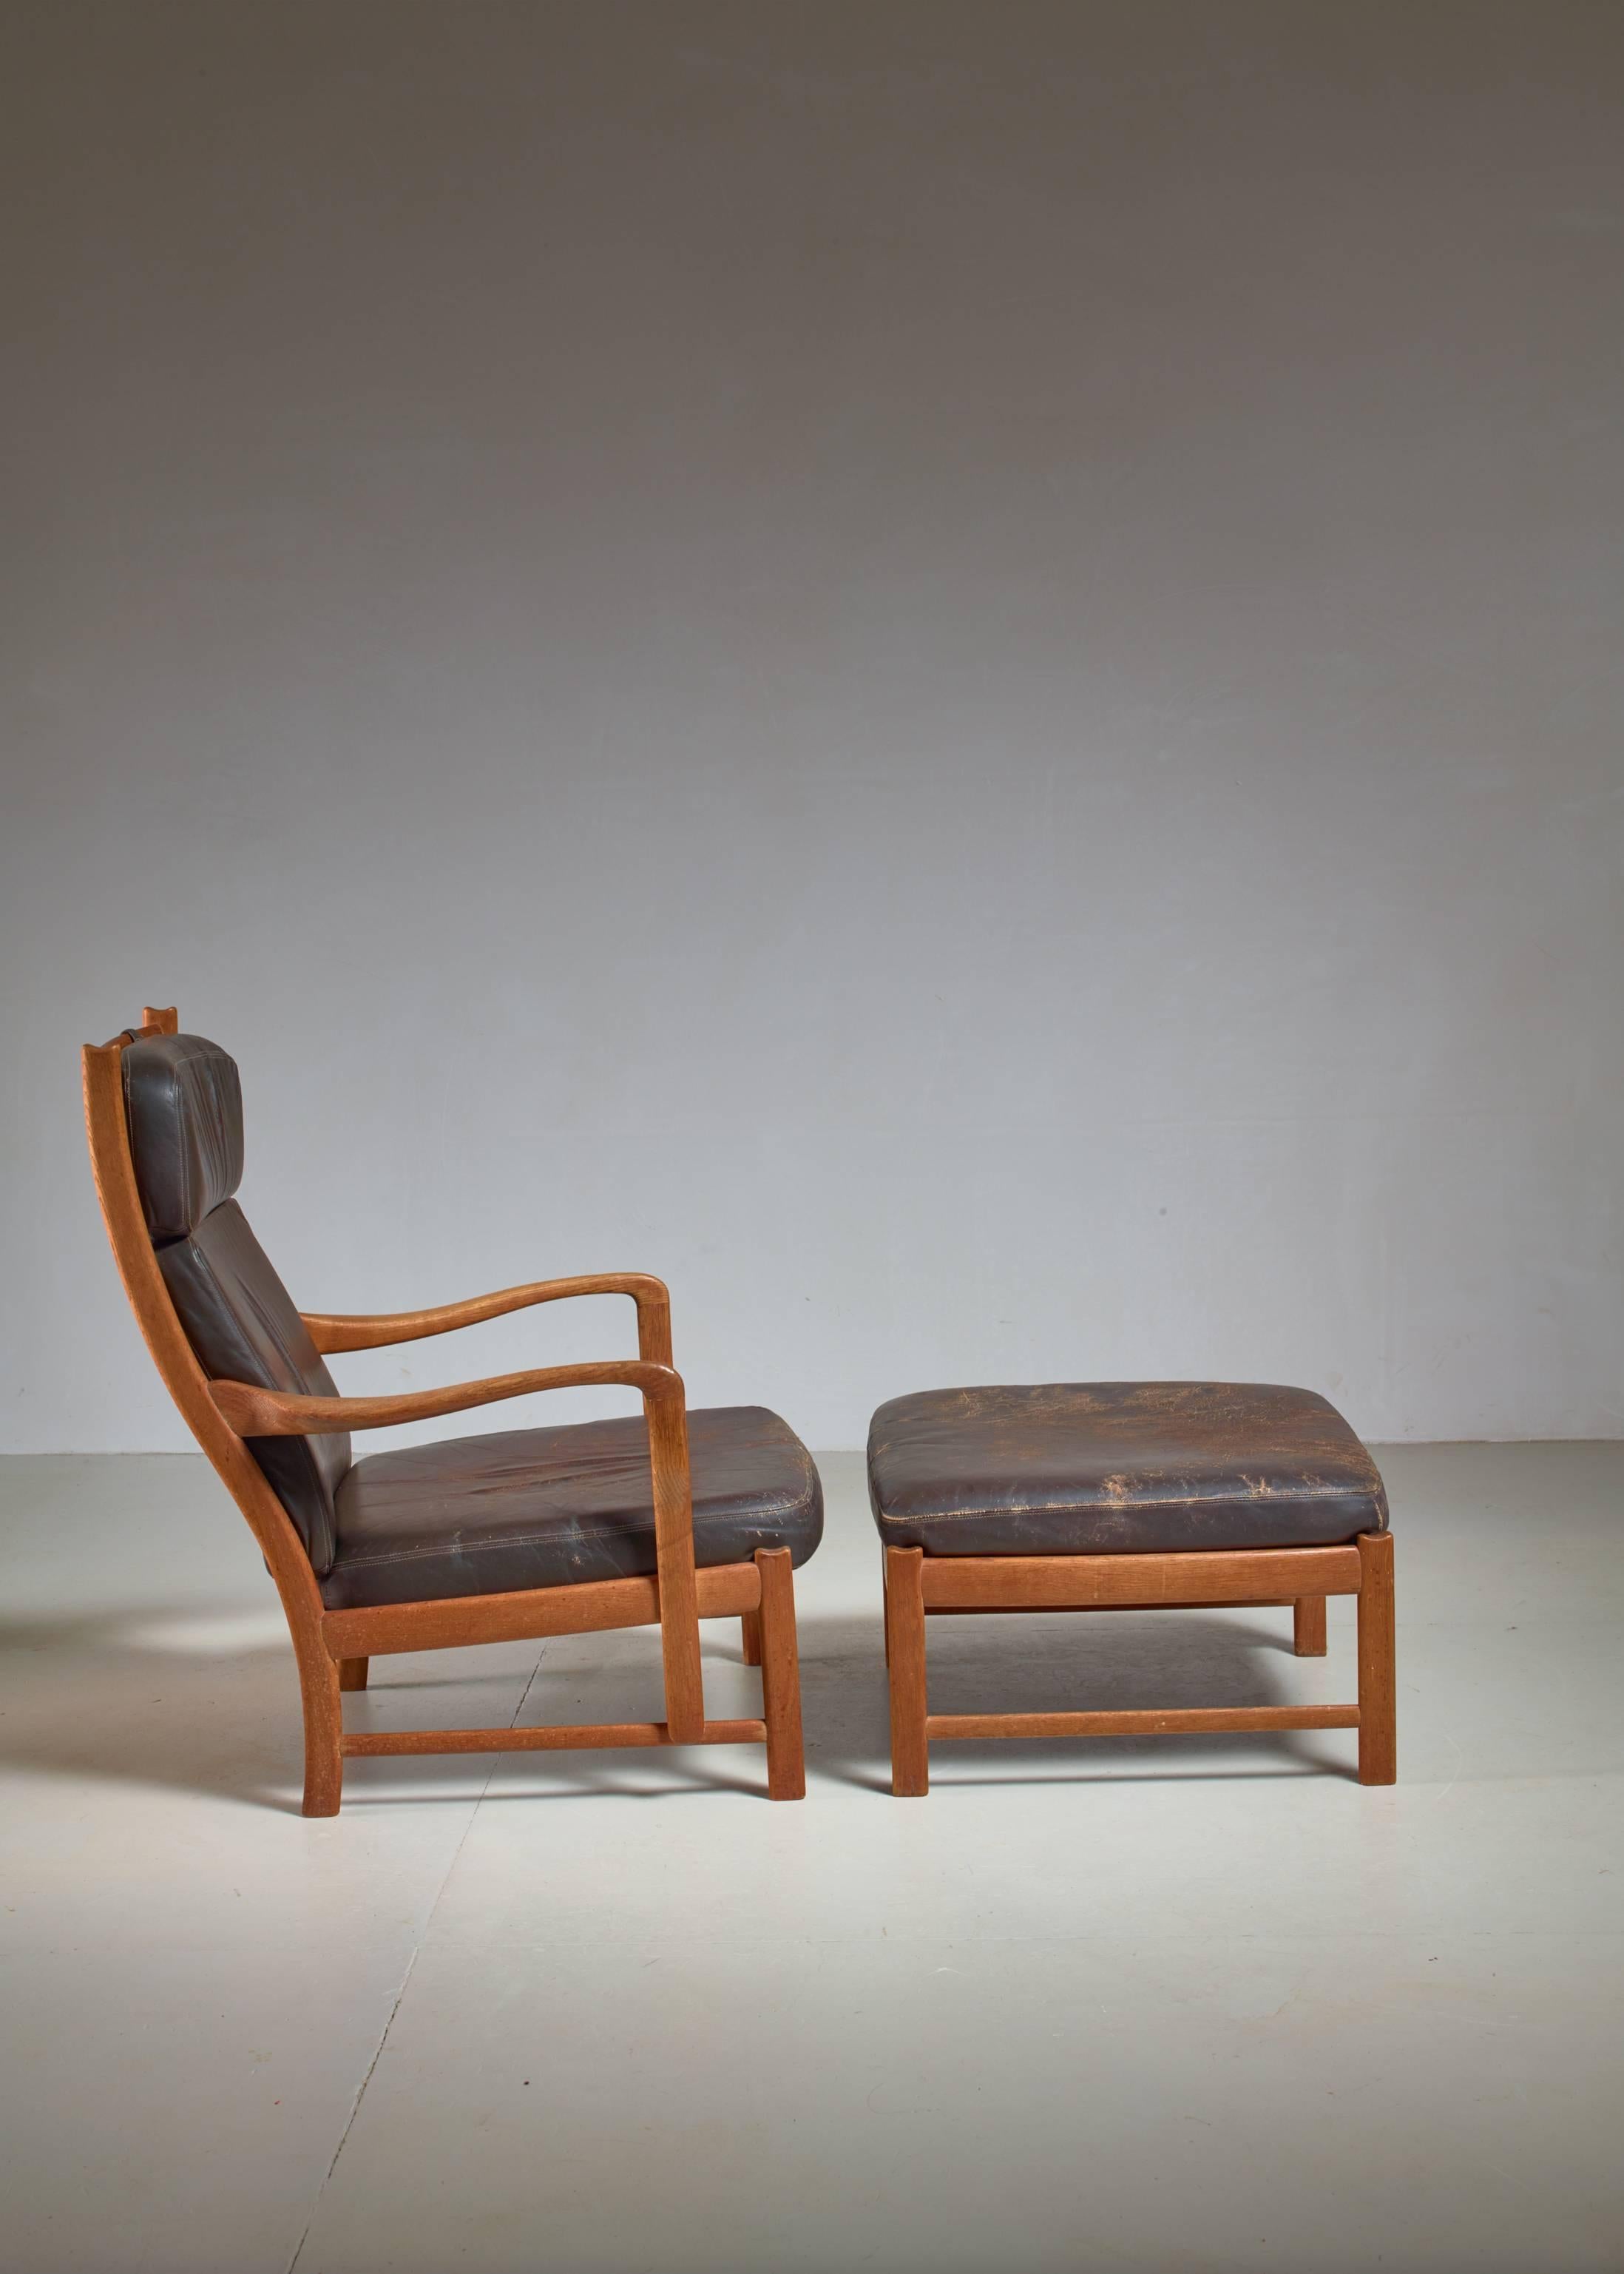 A 1950s Scandinavian lounge chair with a matching ottoman. Both are made of oak with dark brown leather.
The wood is in excellent condition, the leather has some mild wear.